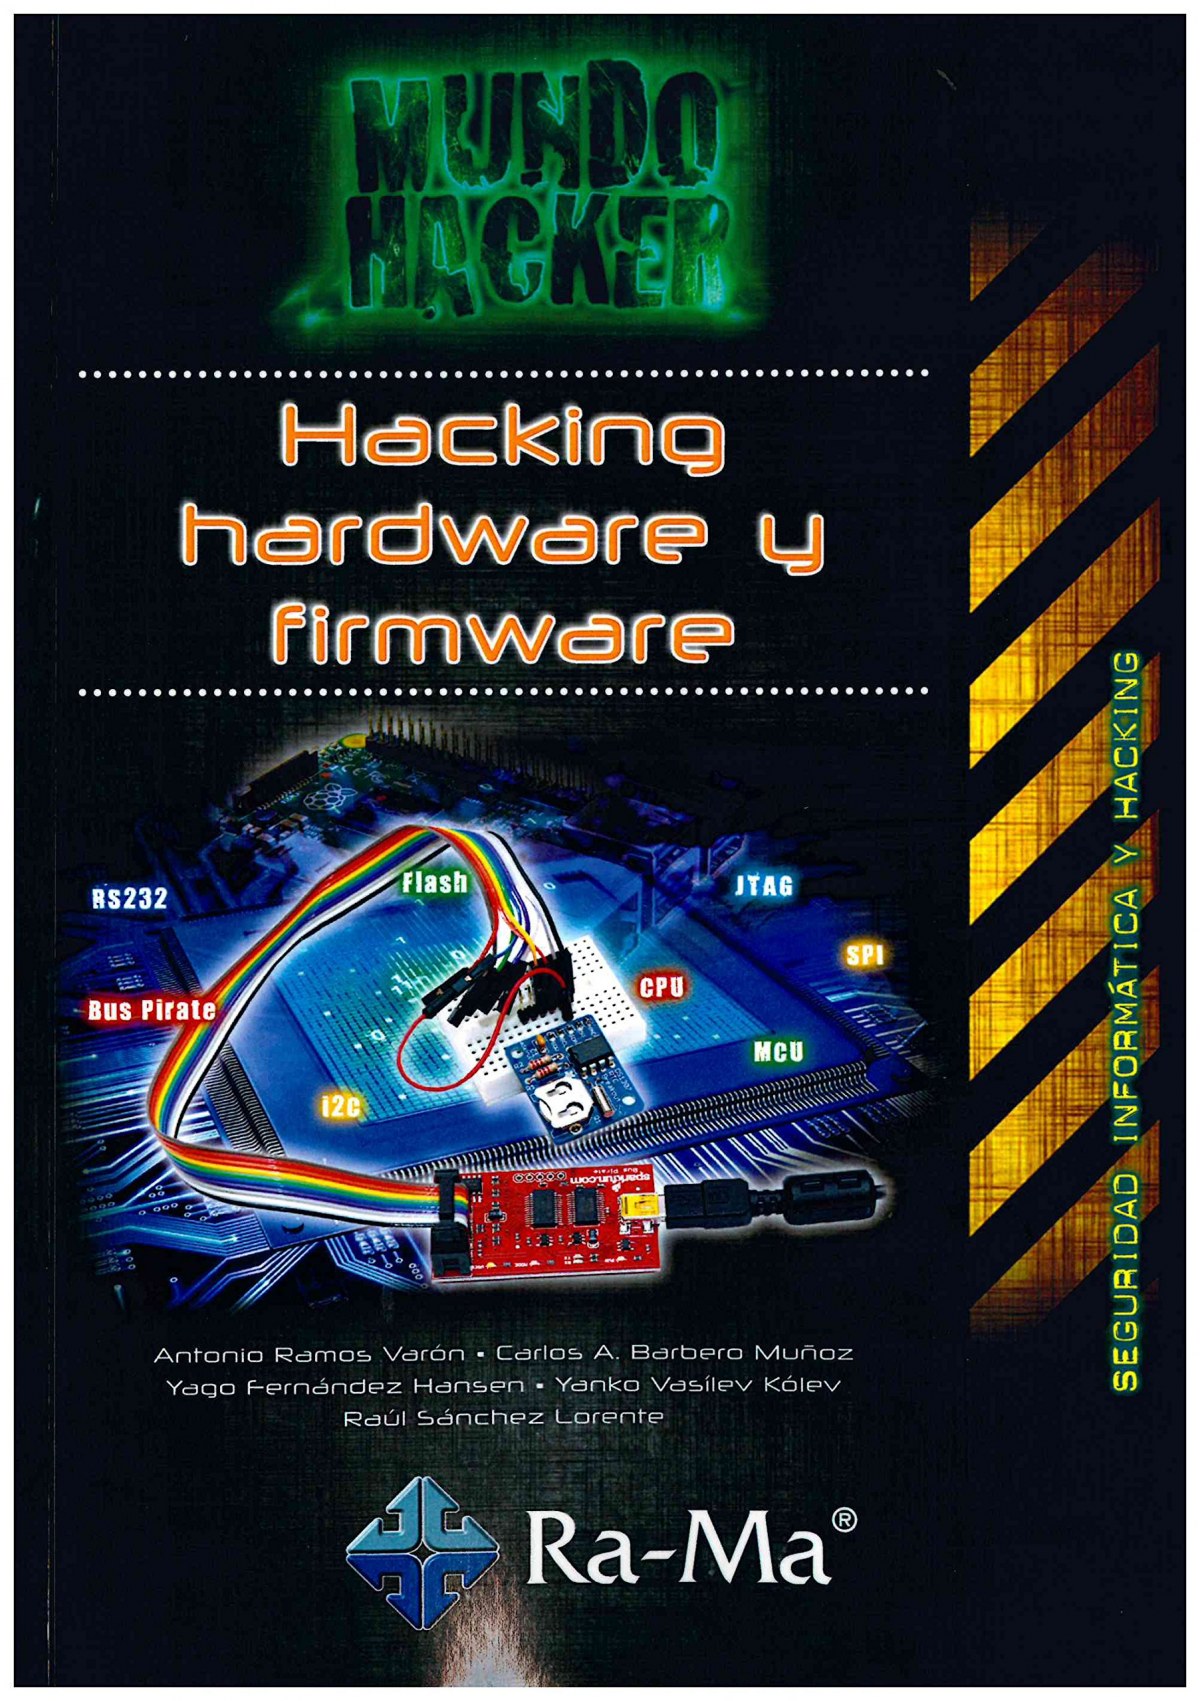 Hacking hardware y firmware - Vv.Aa.